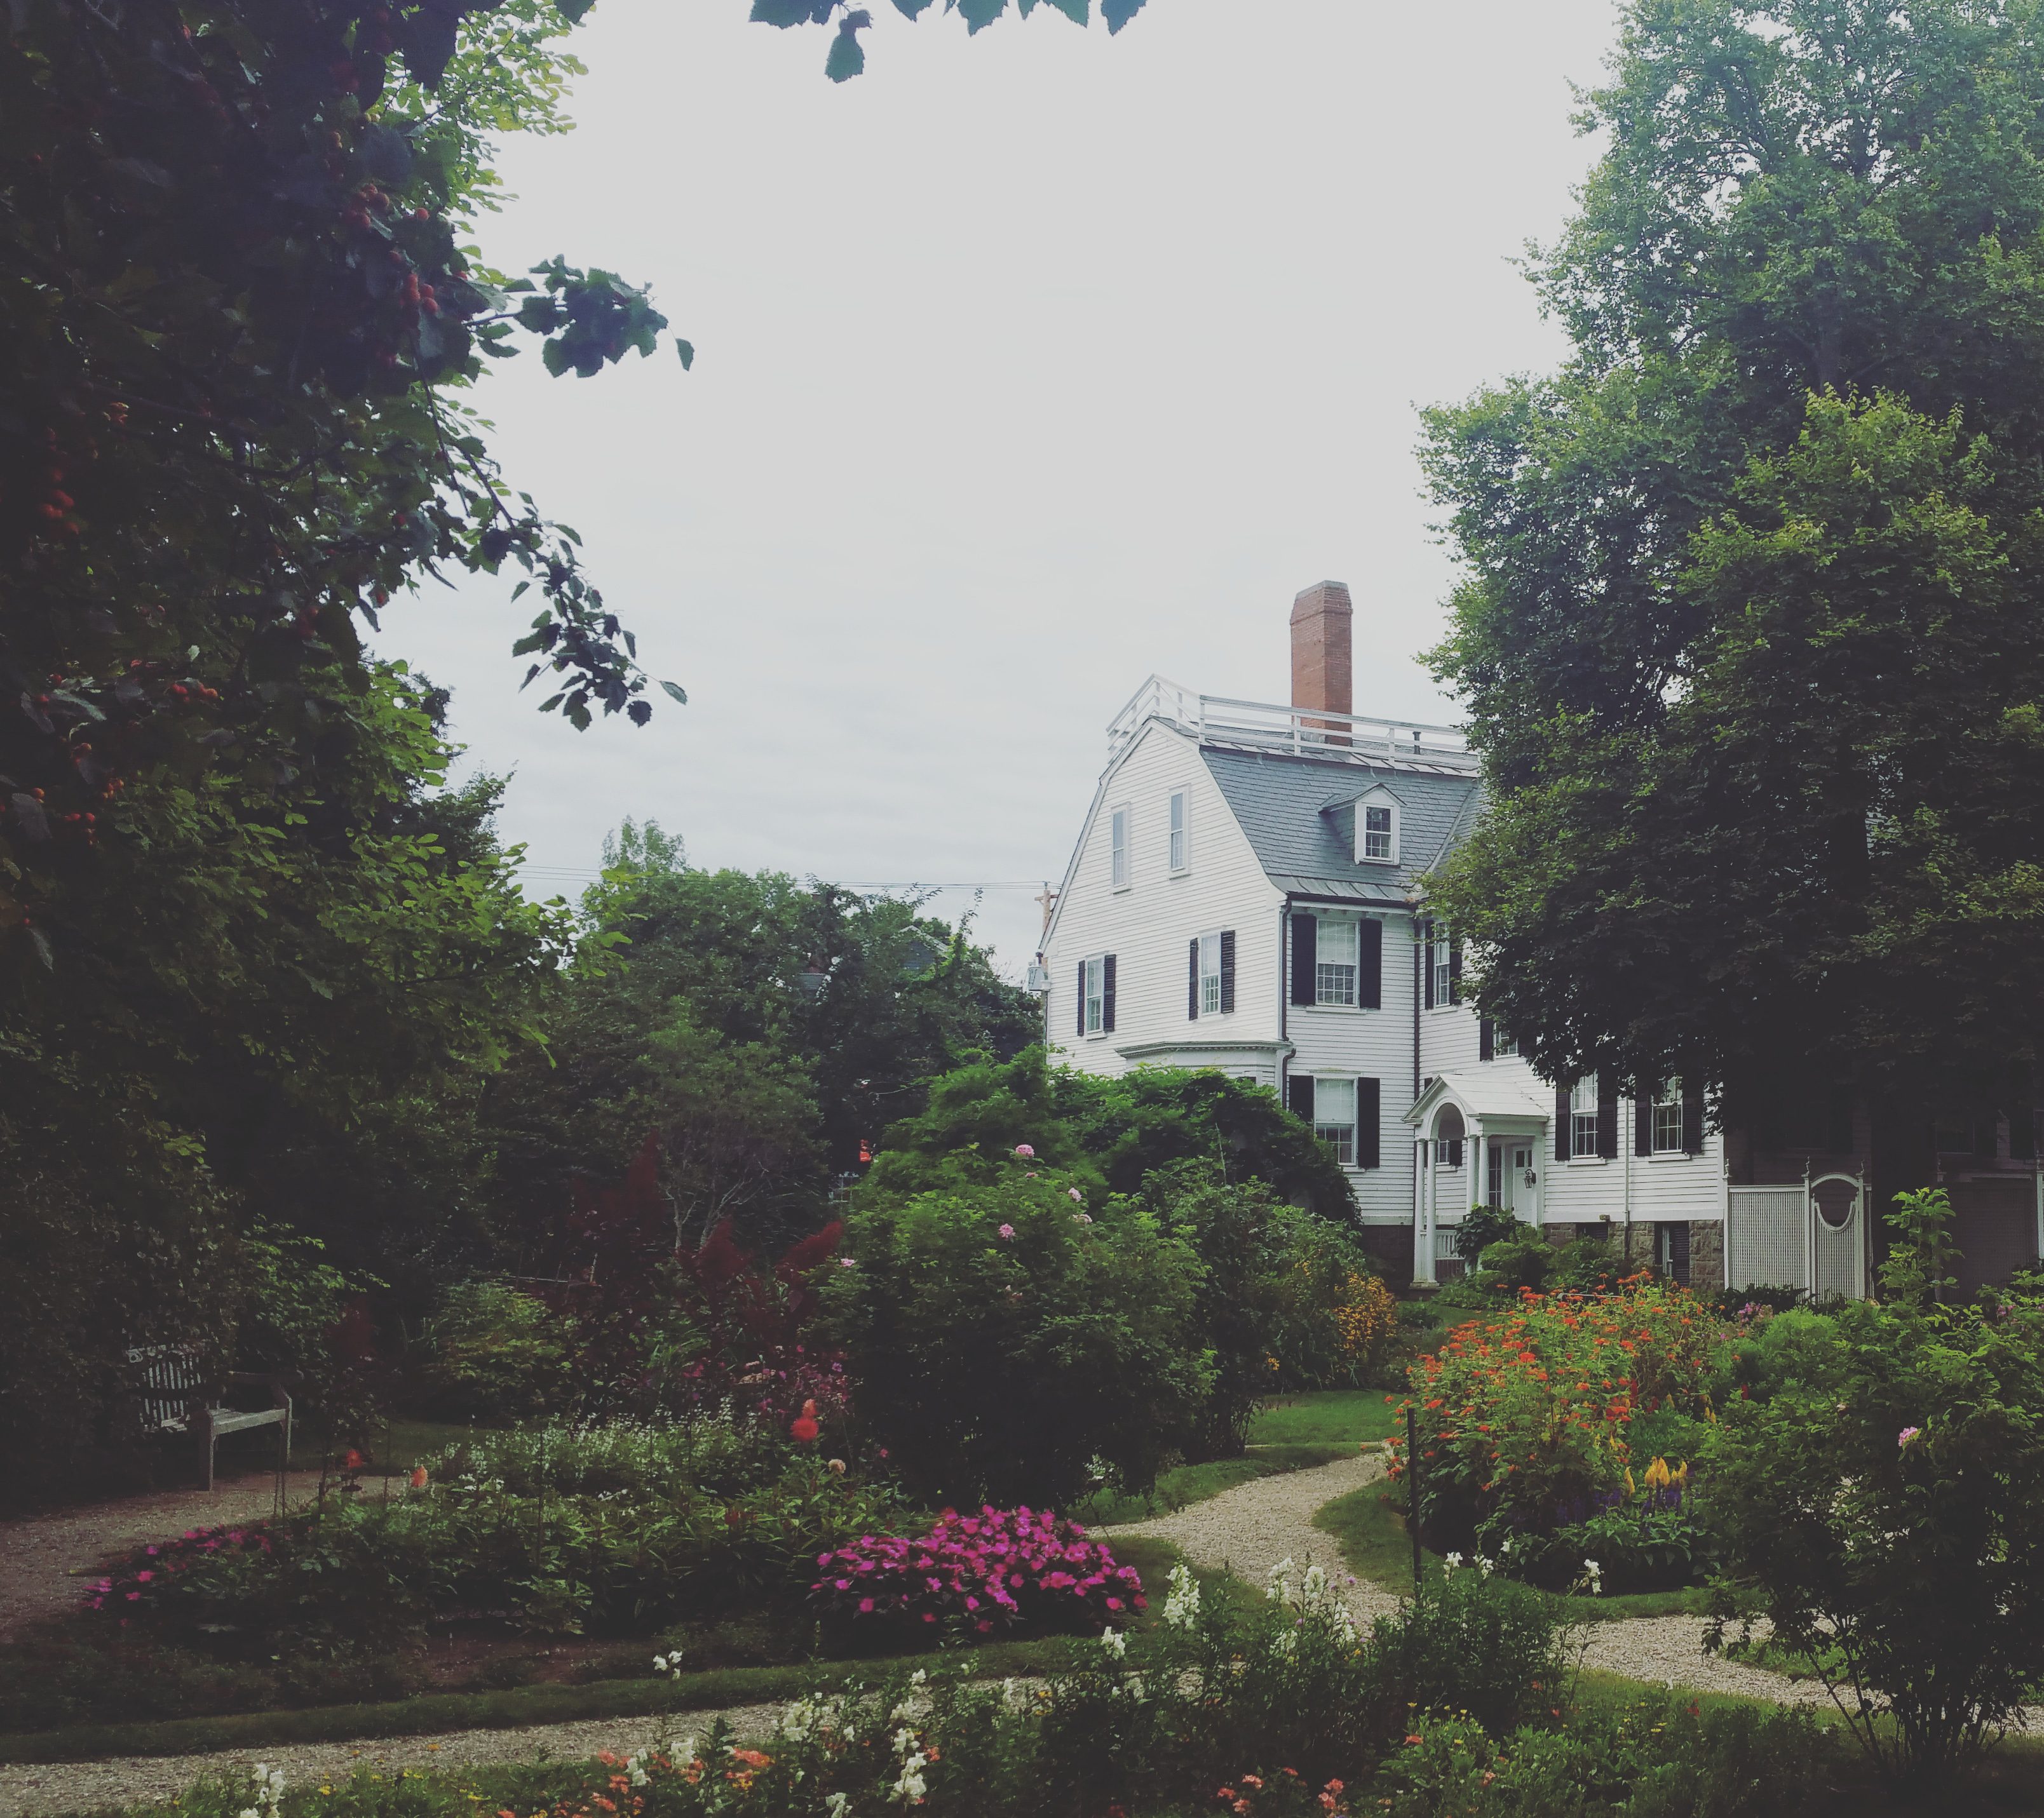 things to do in salem, five things i think are overlooked or missed in salem ma